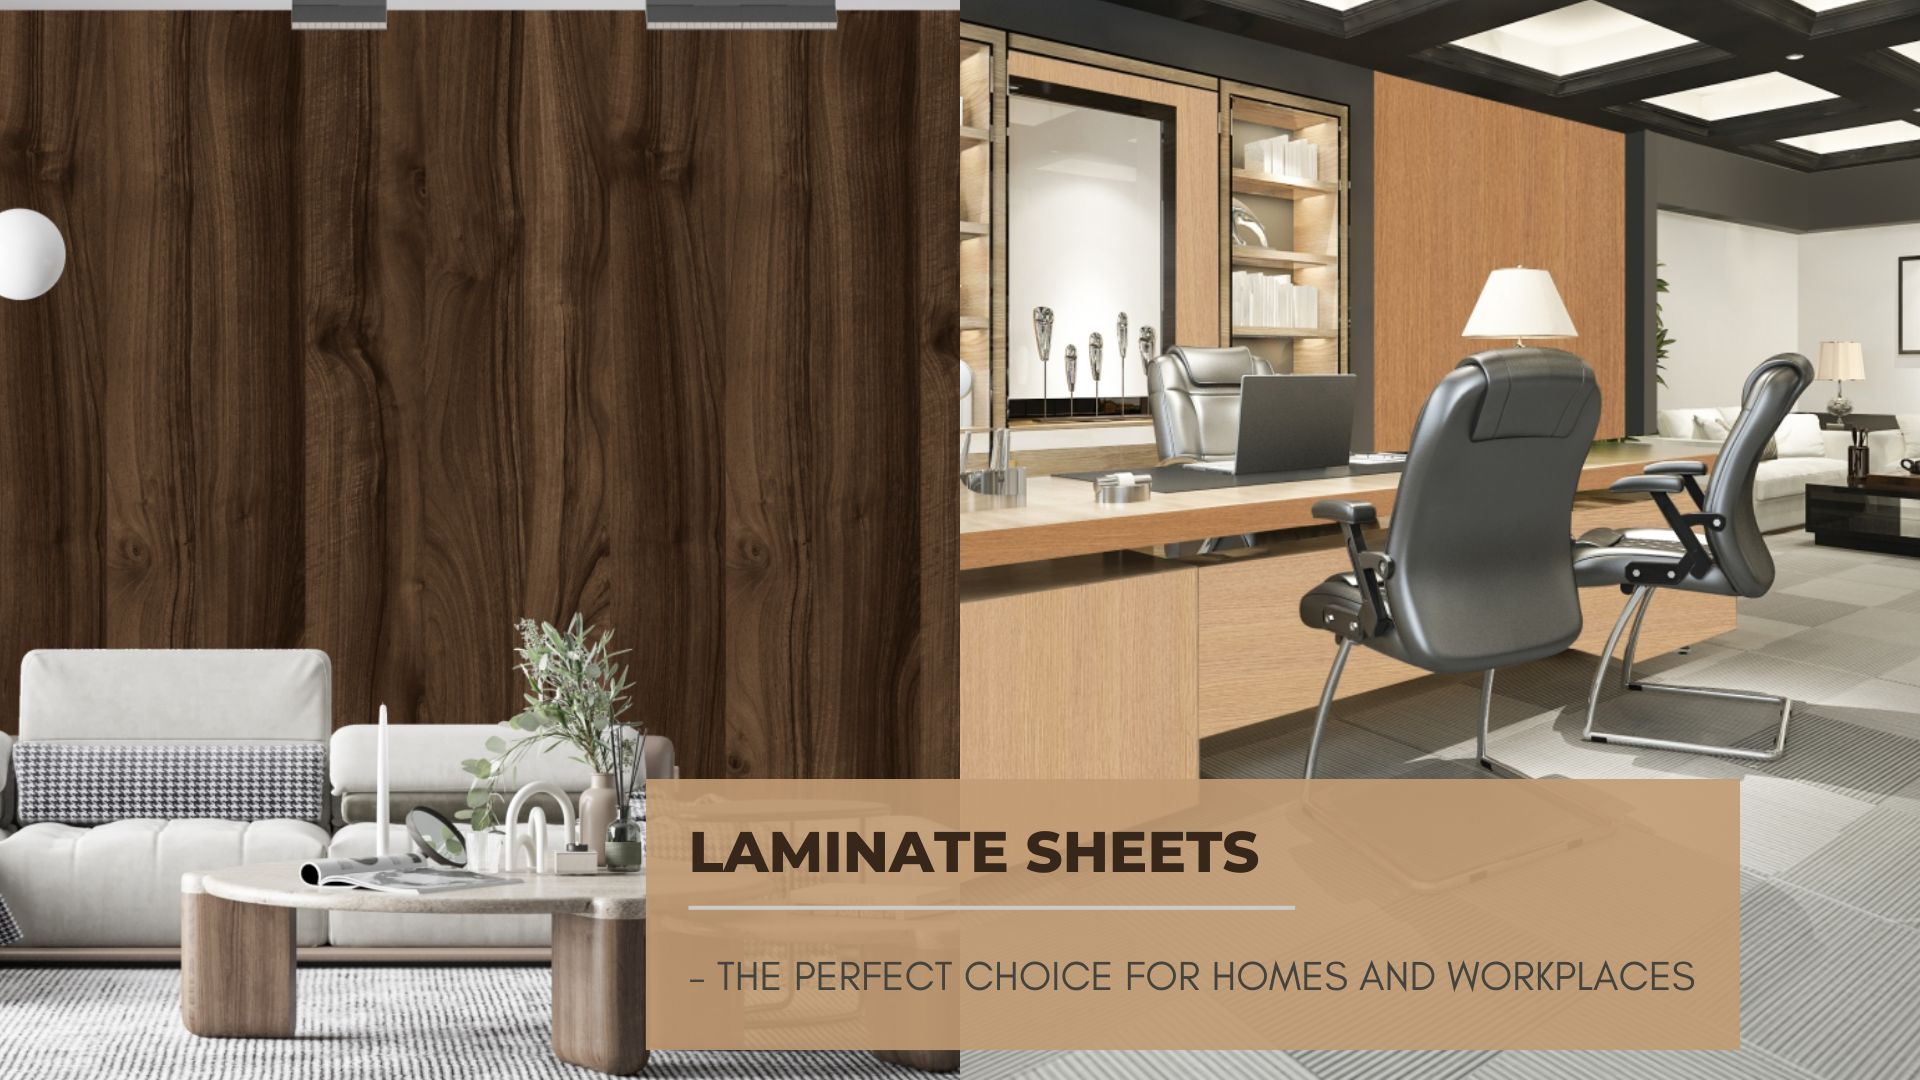 Laminate Sheets - The Perfect Choice for Homes and Workplaces